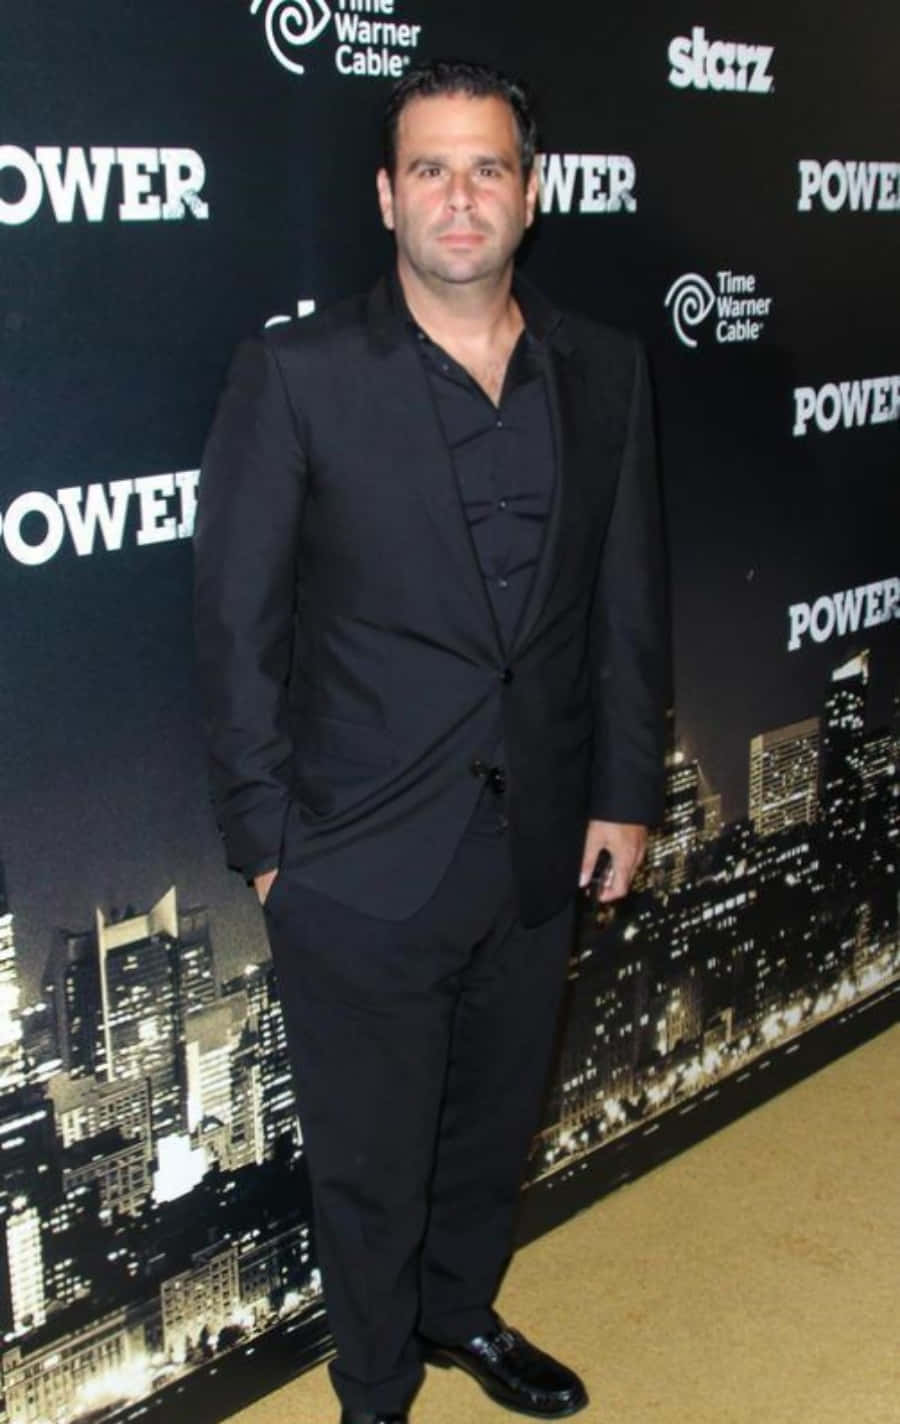 A Man In A Black Suit Standing On A Carpet